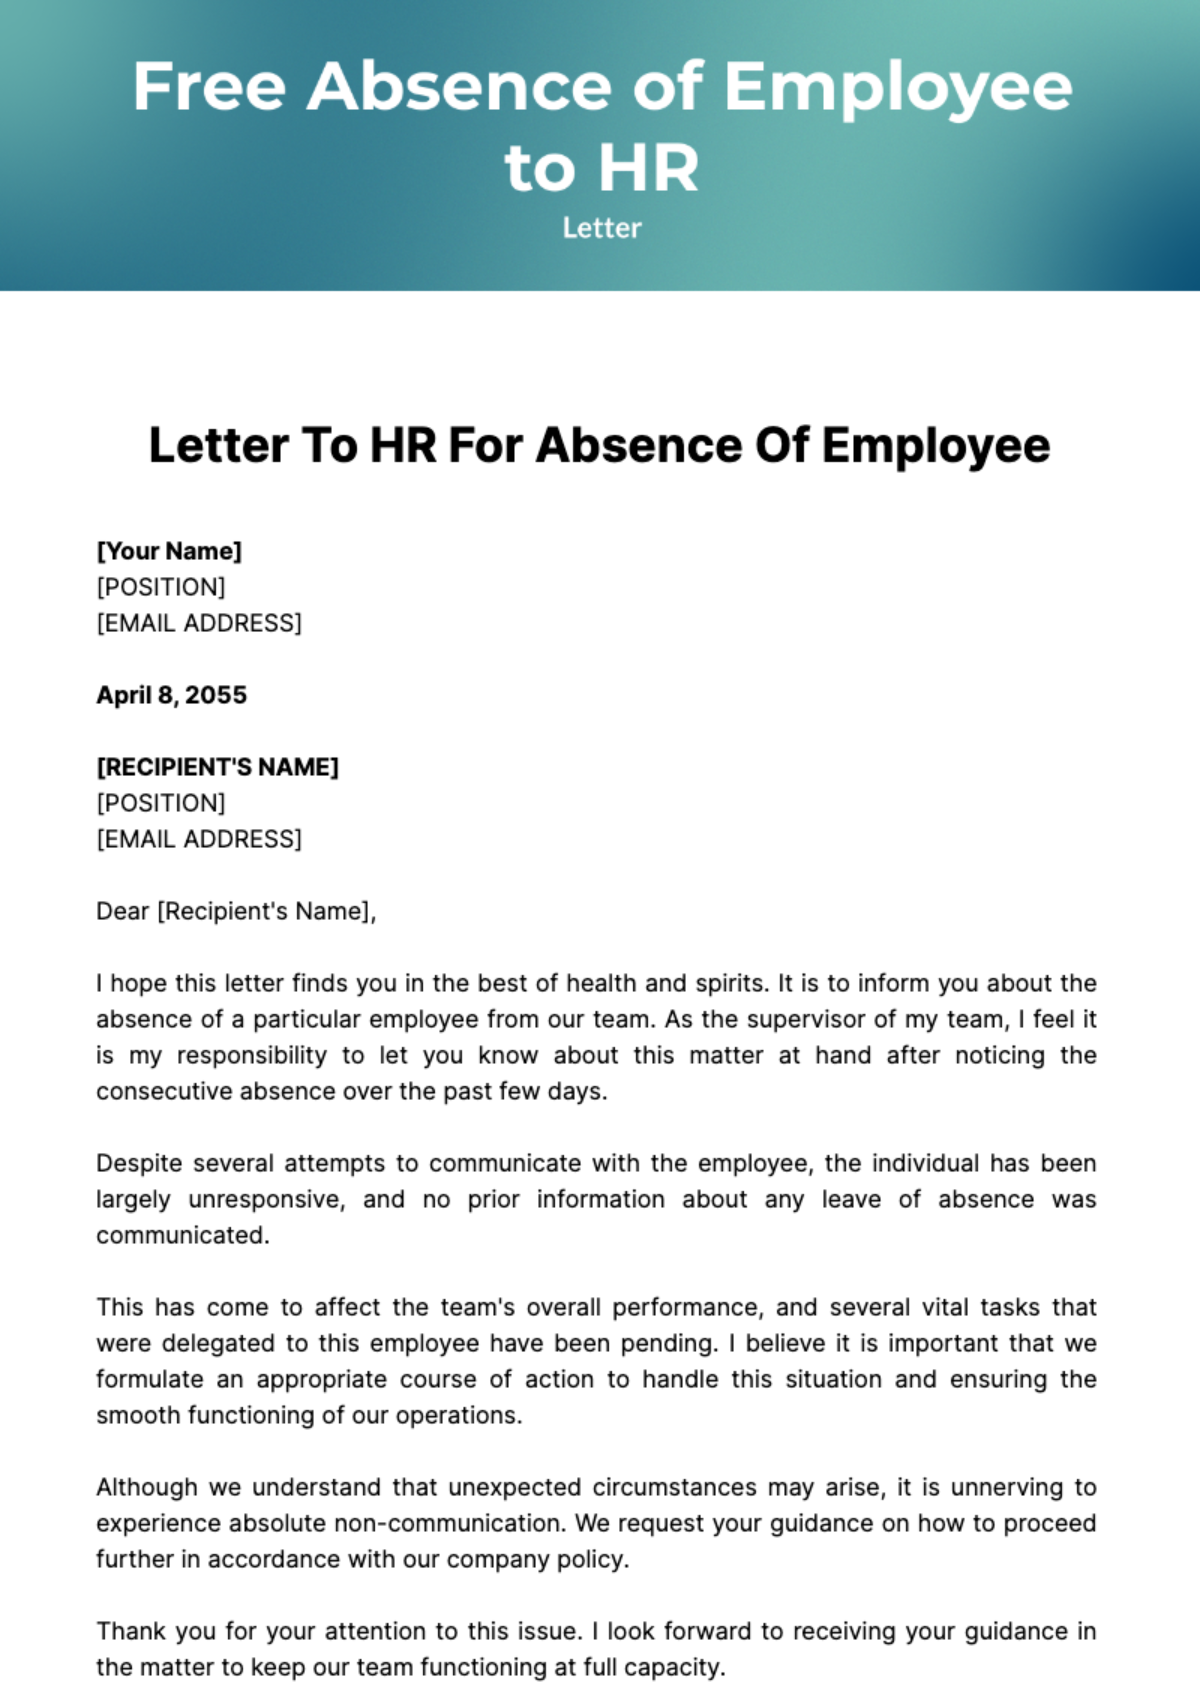 Free Letter to HR for Absence of Employee Template